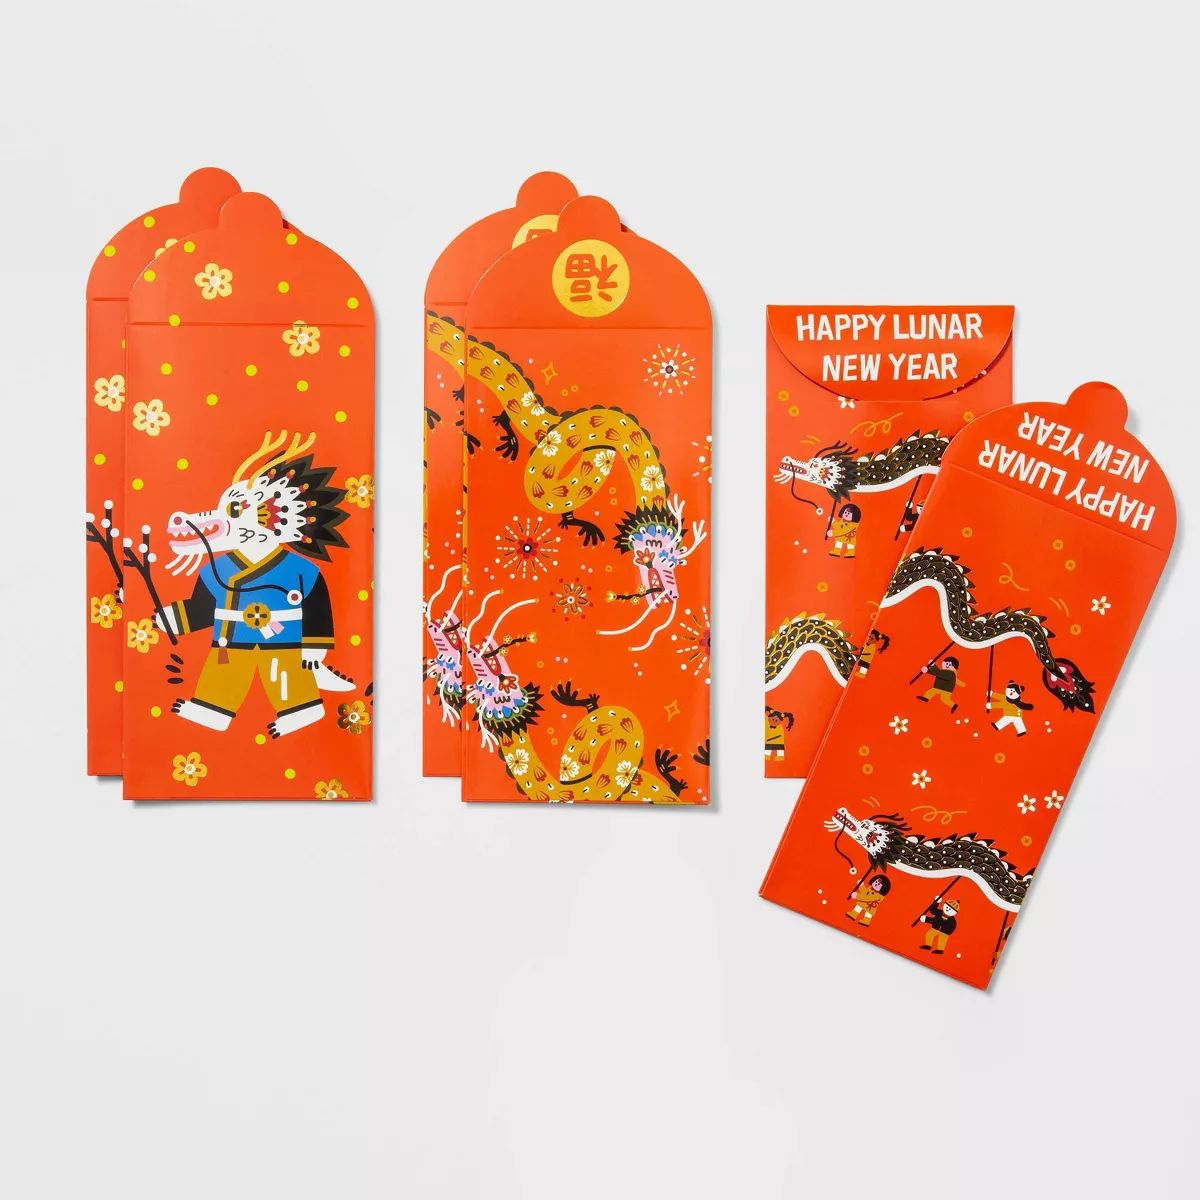 6ct Lunar New Year Youthful Red Envelopes with Gold Foil | Target